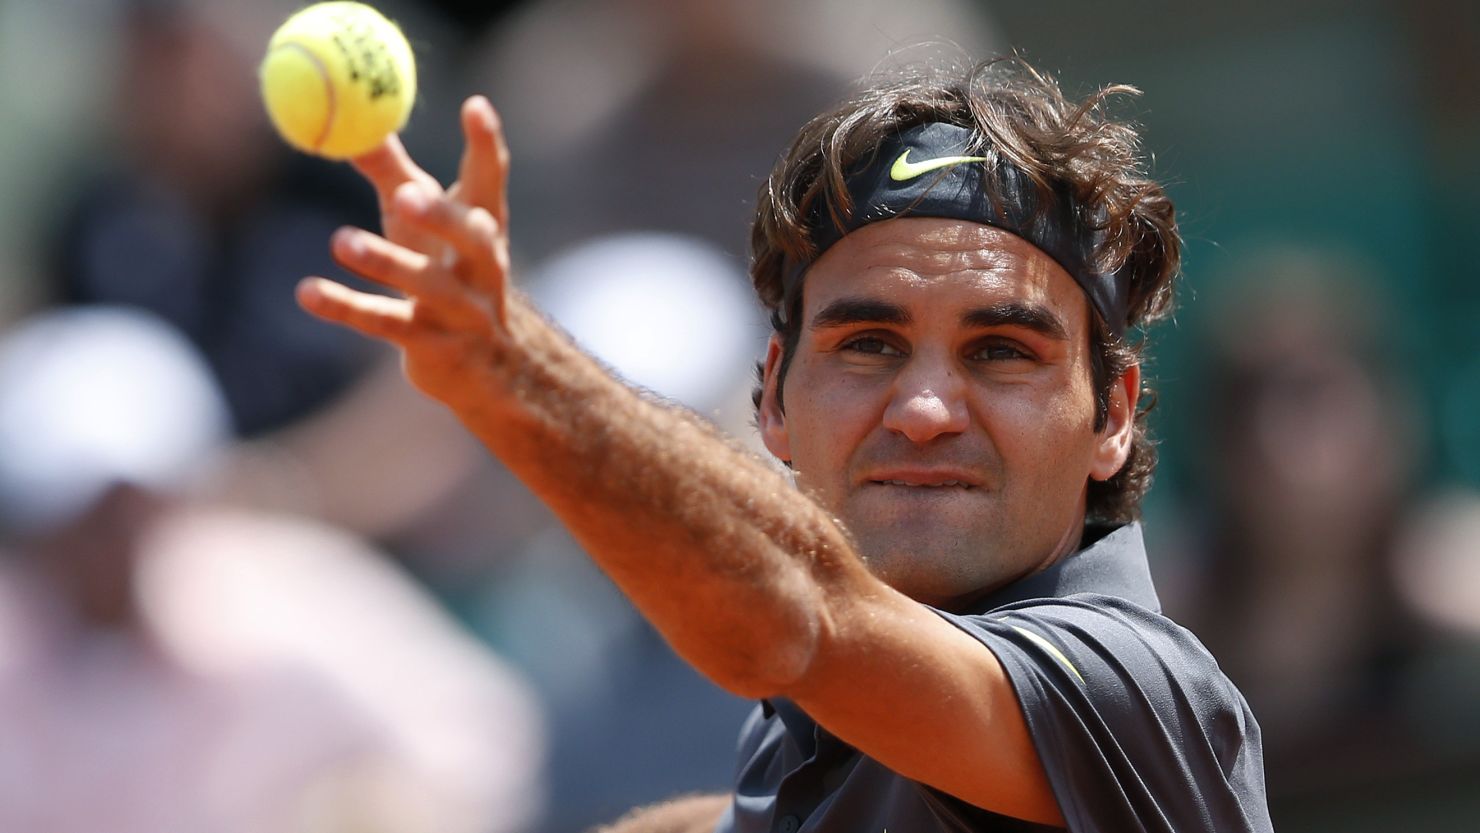 Roger Federer can now boast the most grand slam victories of all time after his 234th win at the French Open